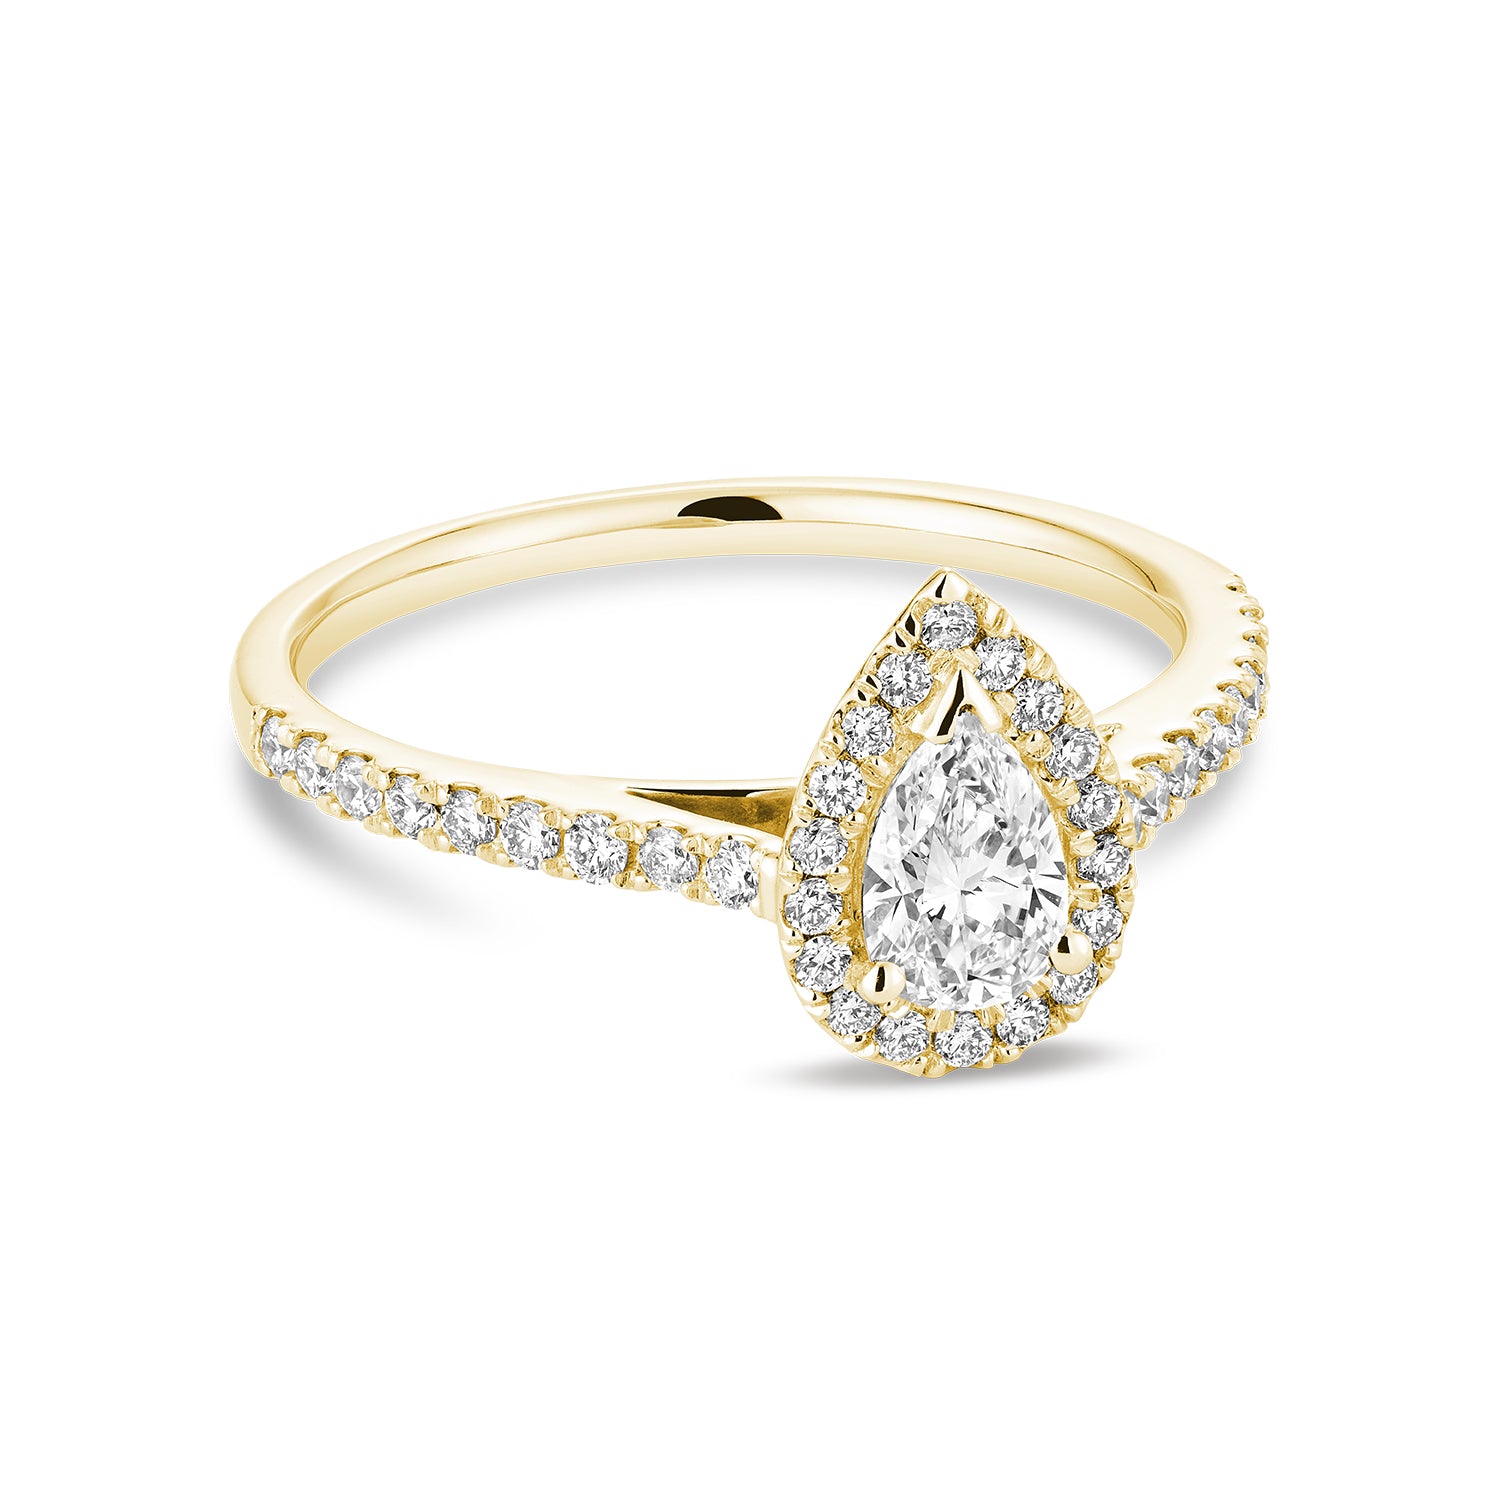 Hemsleys Collection 14K Pear Shape Diamond Engagement Ring with Pear Shape Halo